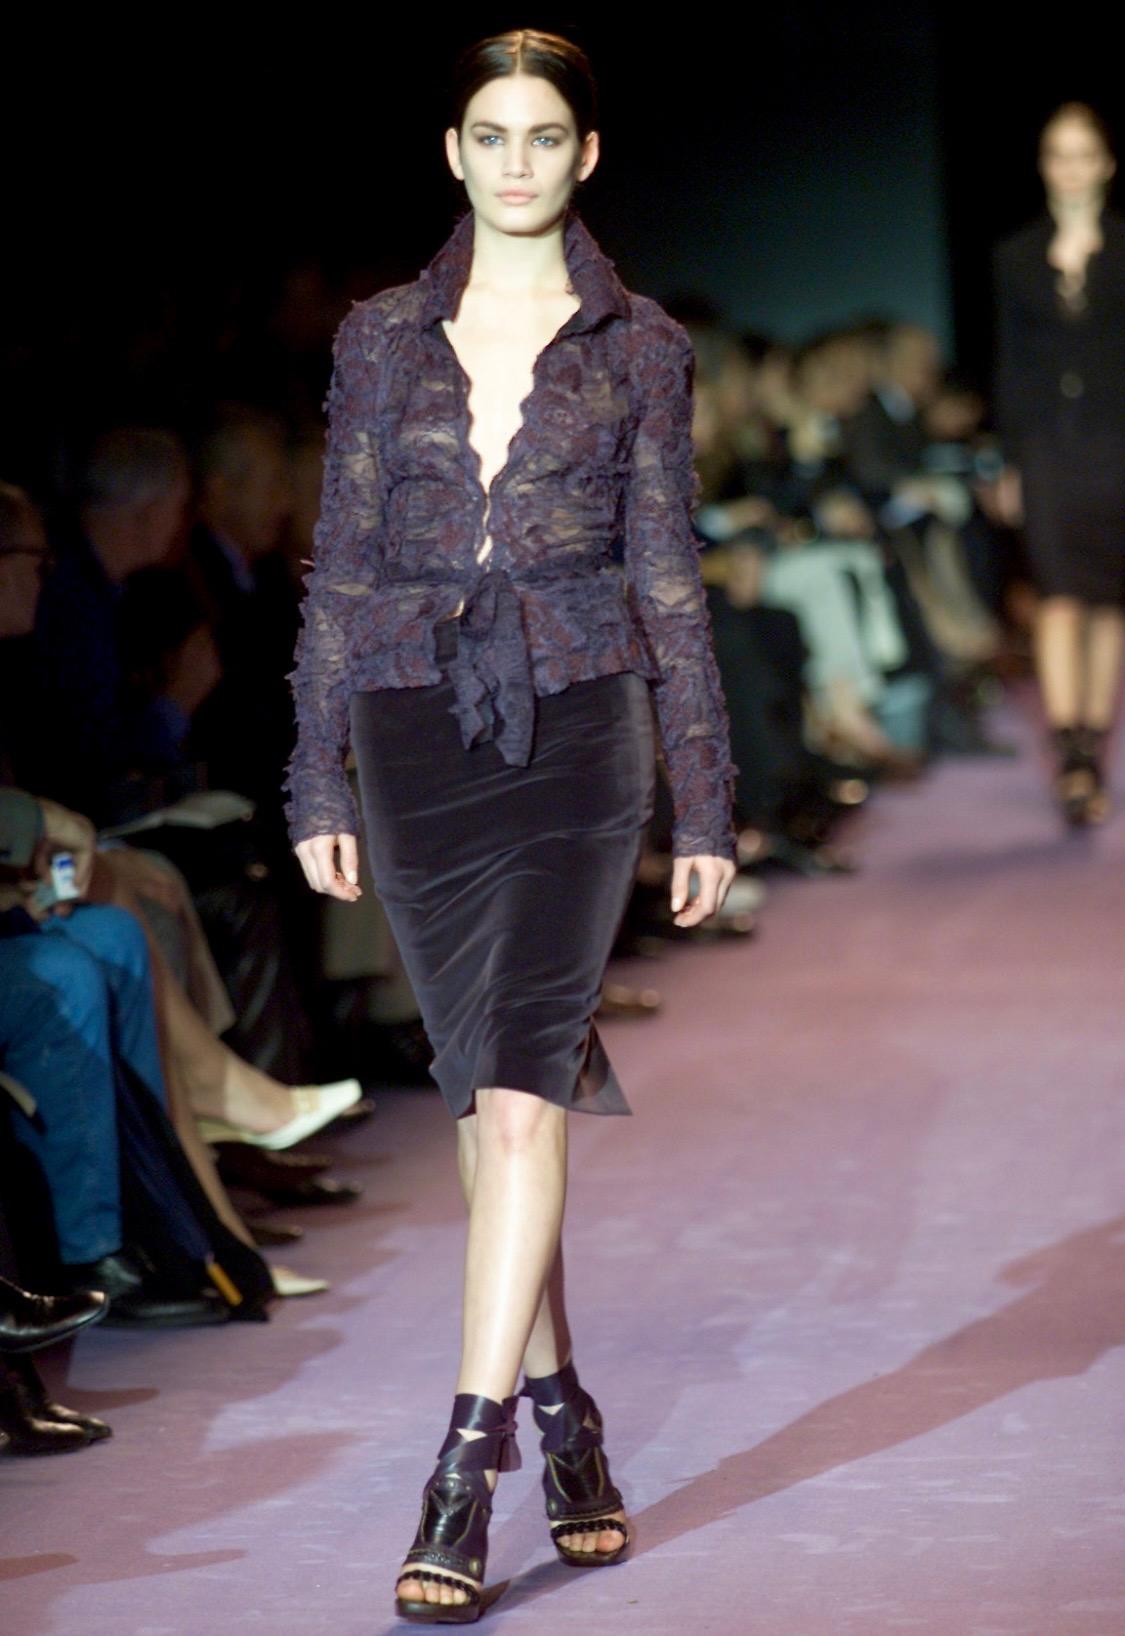 Presenting a sheer embroidered floral lace blouse designed by Tom Ford for Yves Saint Laurent Rive Gauche's Fall/Winter 2001 collection. Debuting on look 7 on Vicky Andrén in the season's runway presentation, this piece features hook and eye